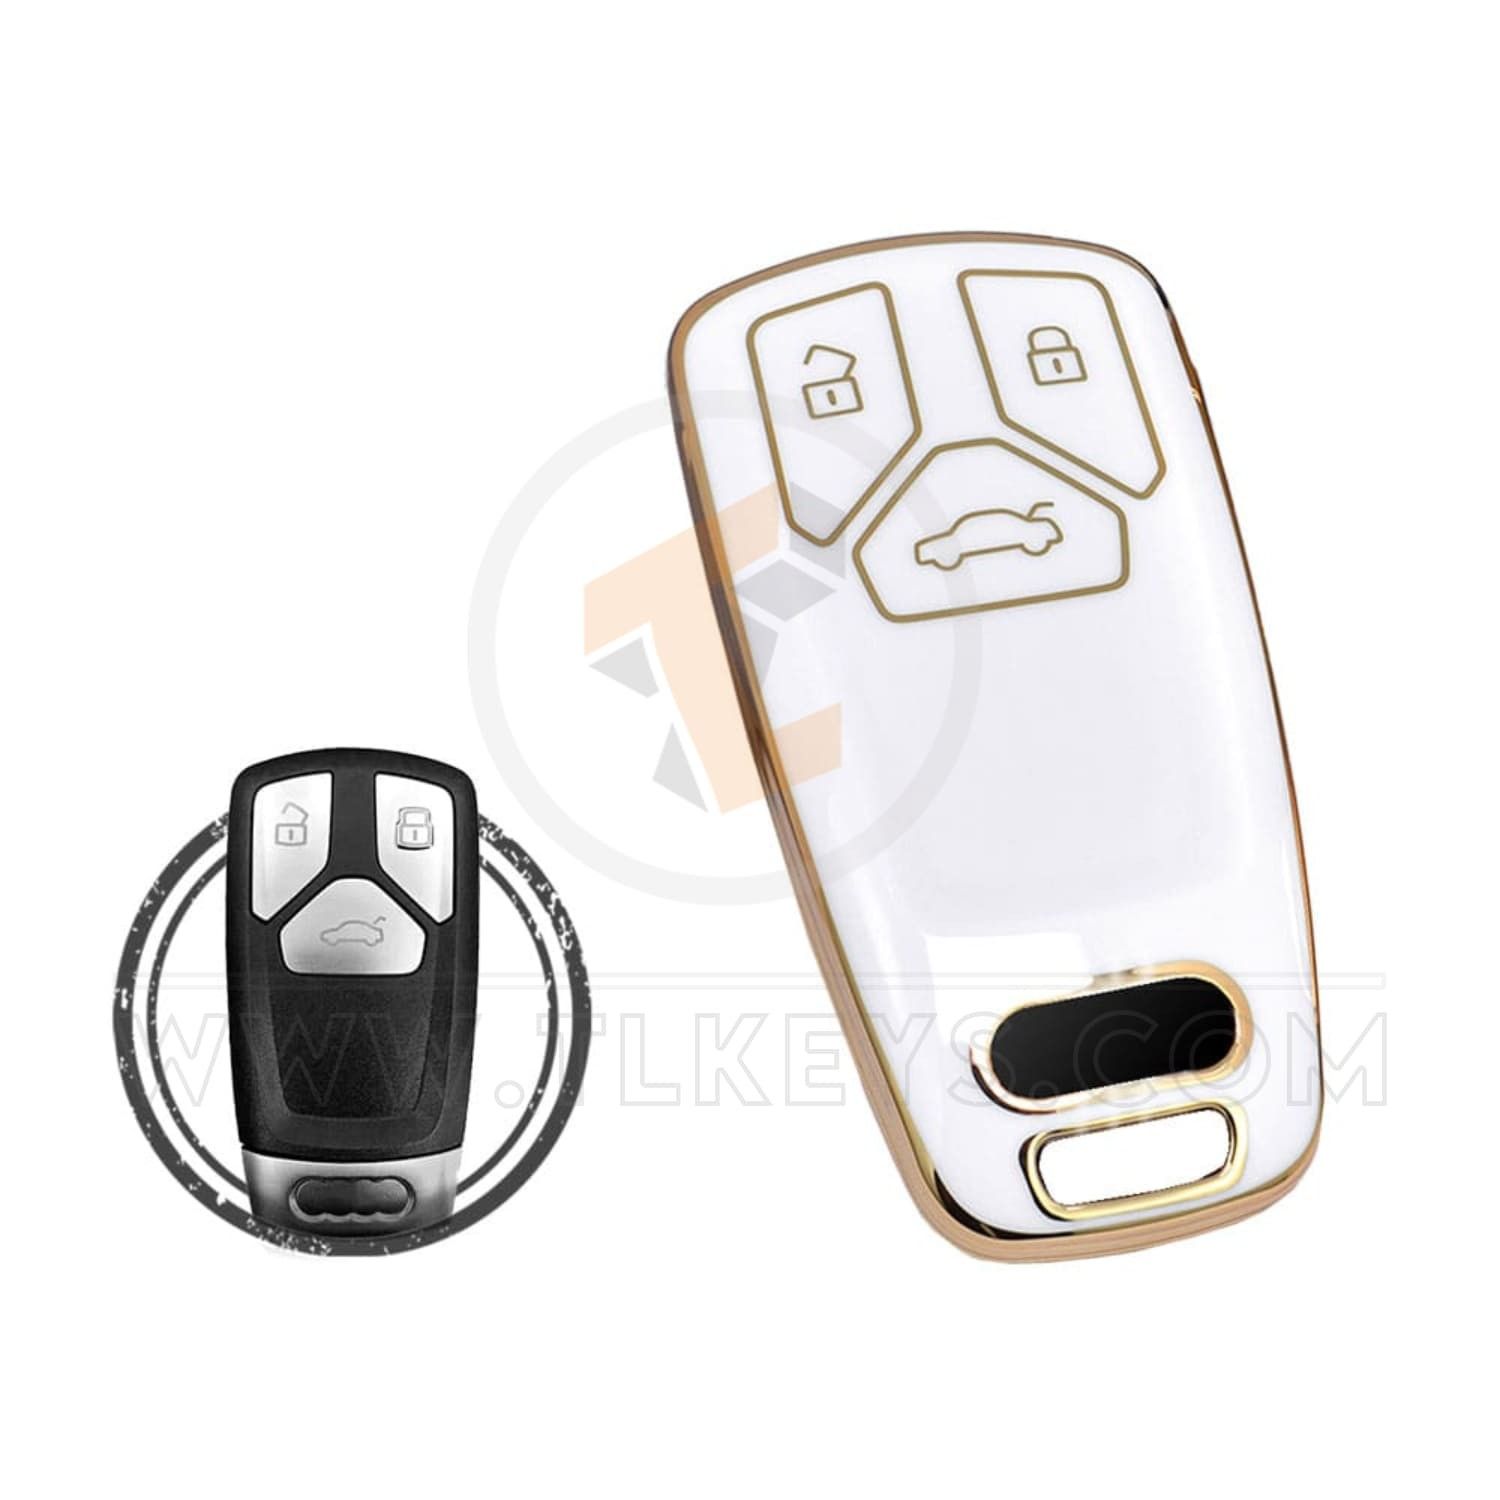 TPU Car Key Cover Case Compatible With Audi TT A4 Buttons 3